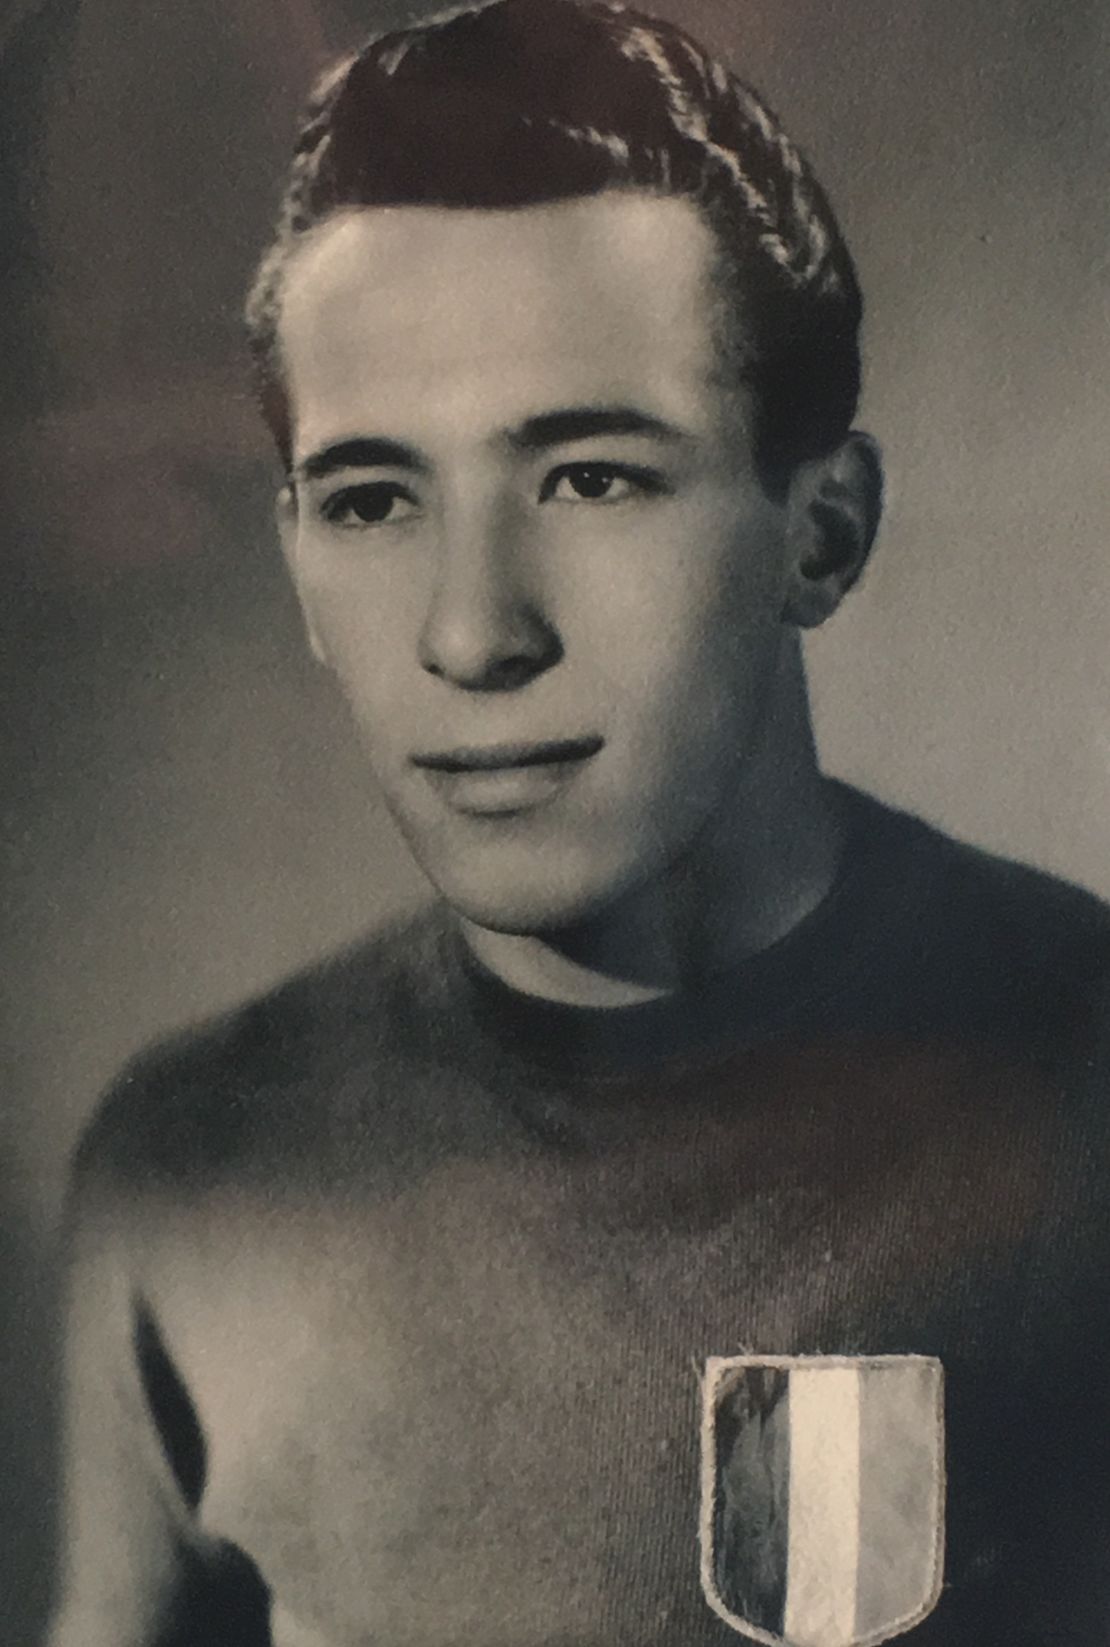 Umberto Motto as a youth team player for Torino.